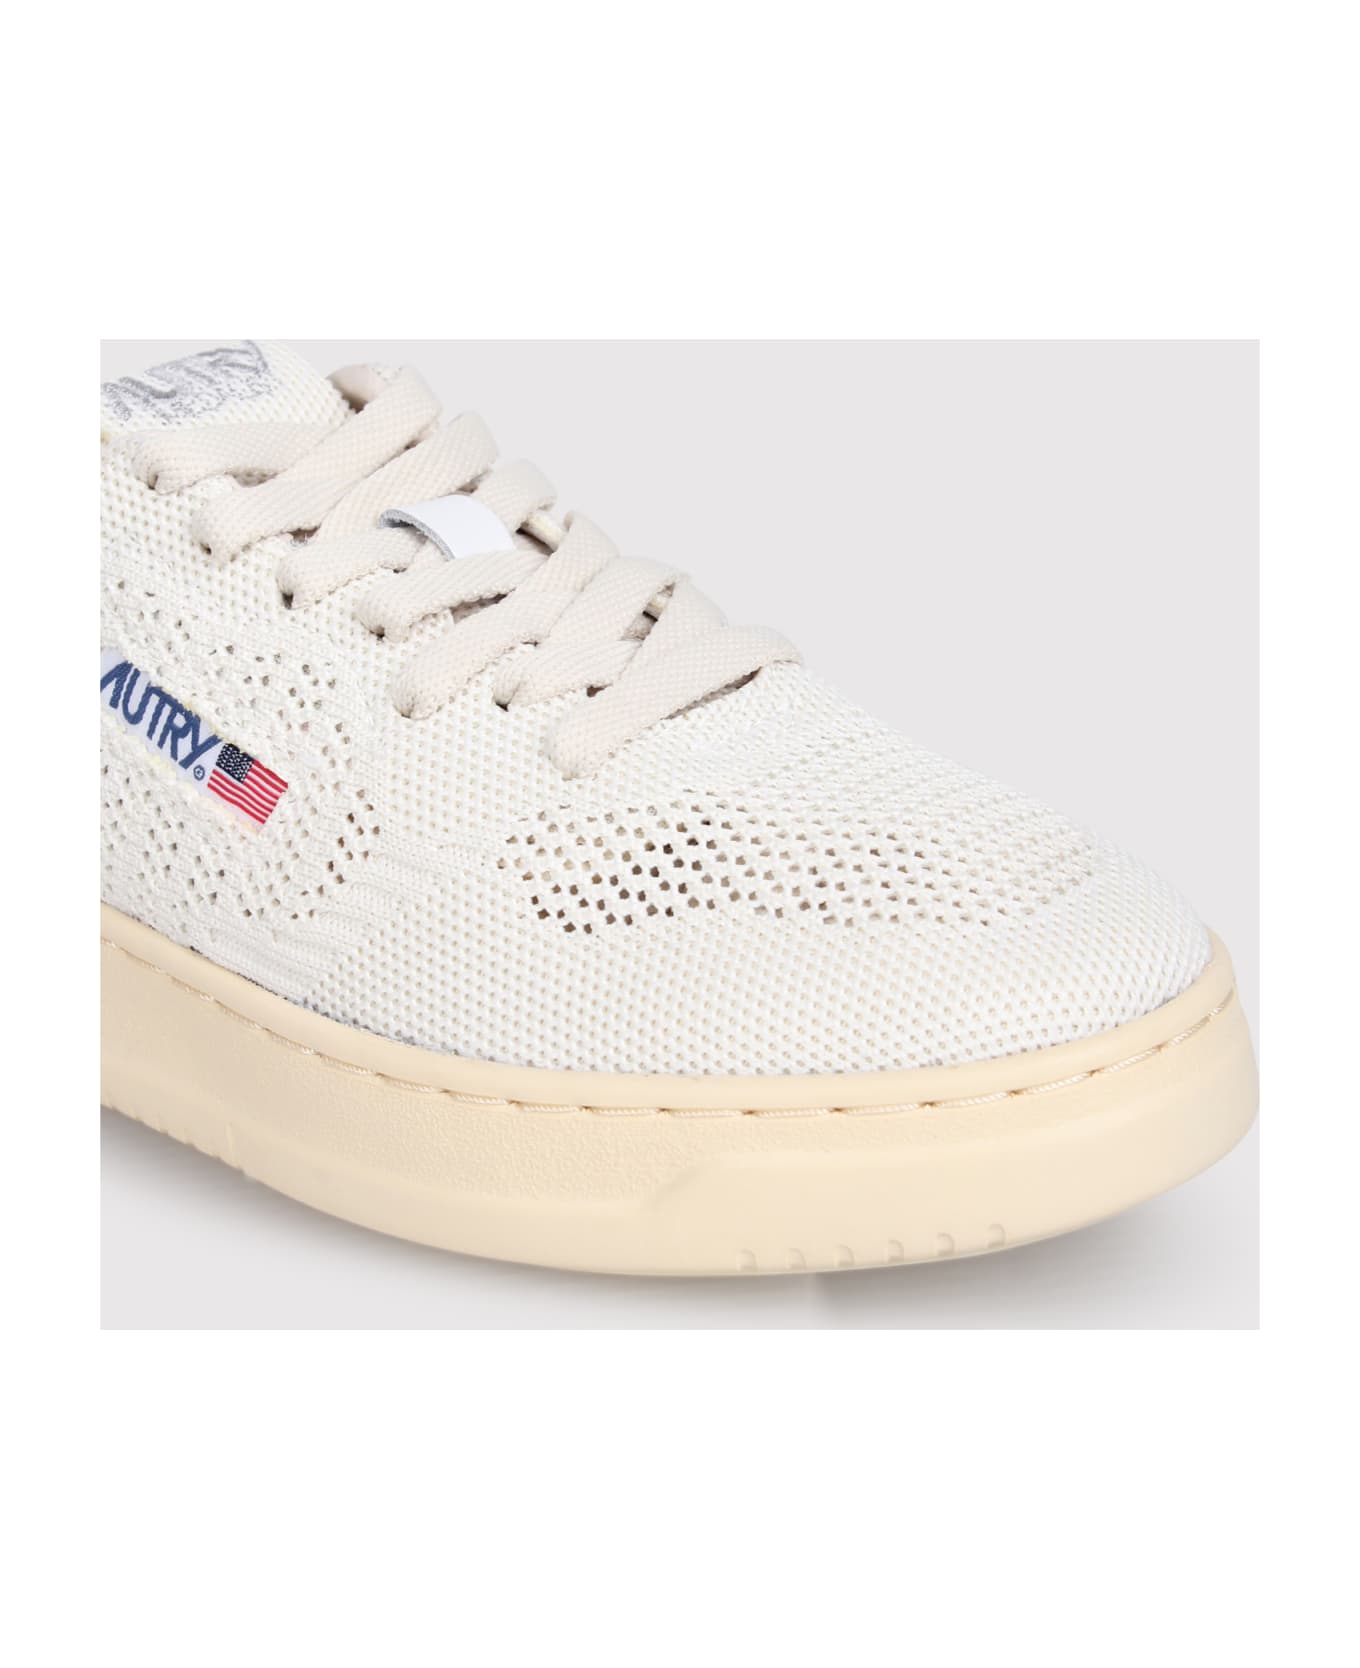 Autry Medalist Easeknit Low Sneakers In Fabric